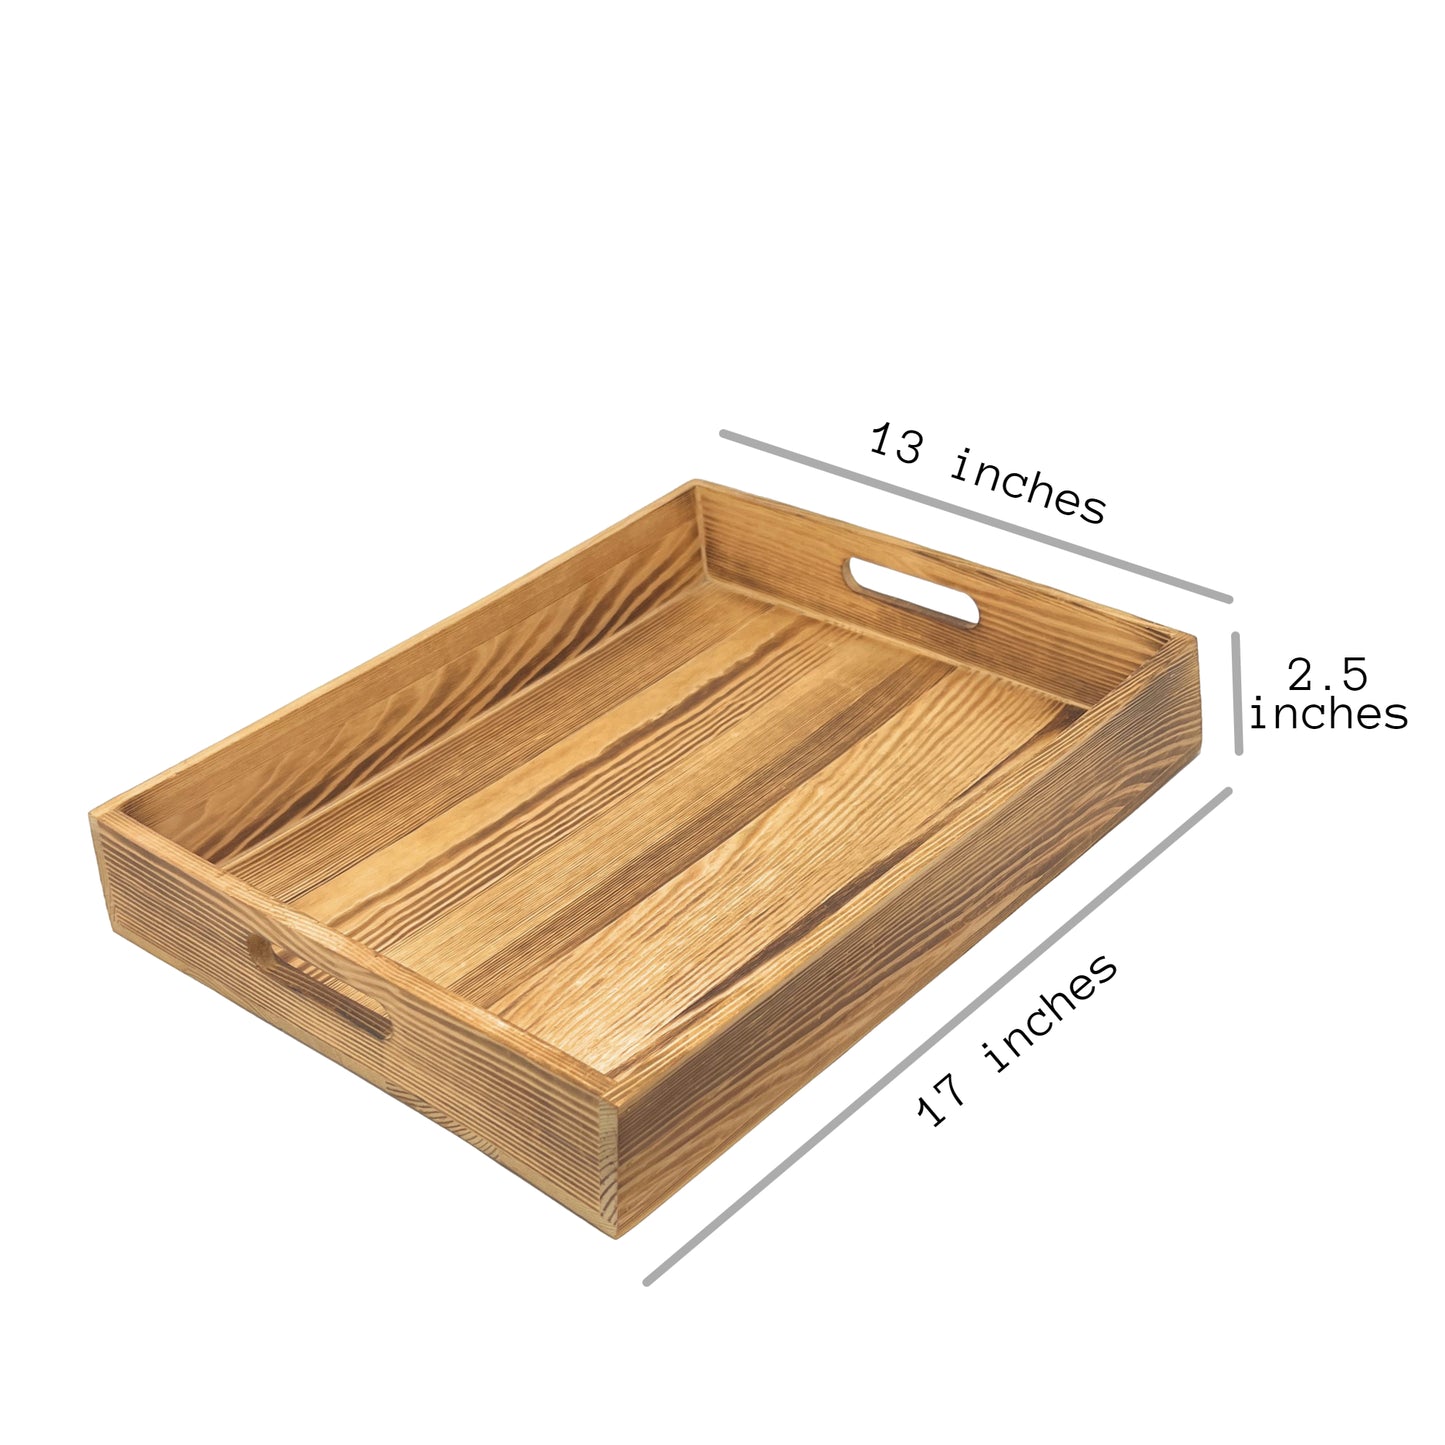 Wood Serving Tray with Handles Rectangular  - 17x13 inches